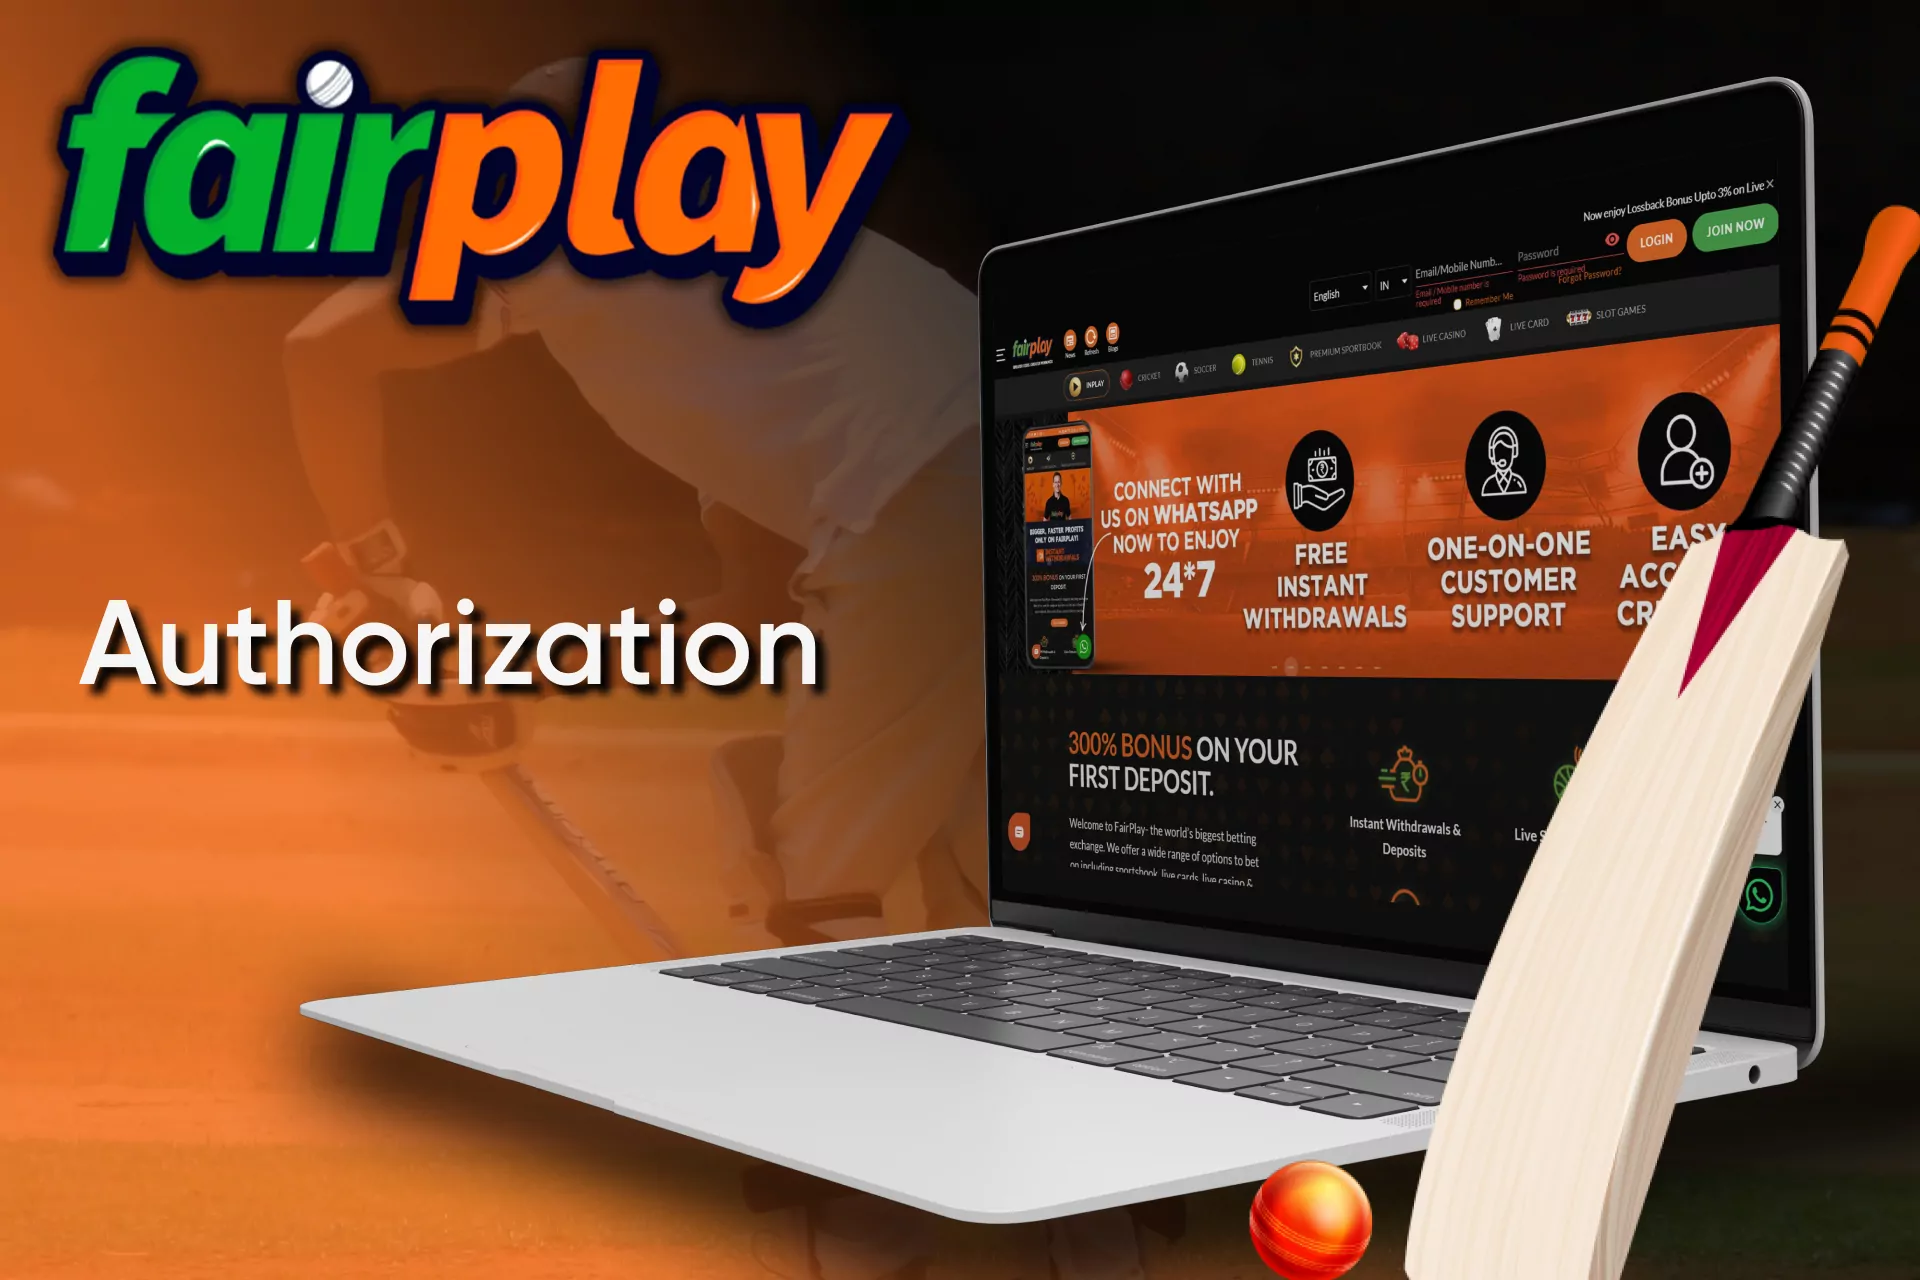 Log in to start betting on the Fairplay site or in the app.